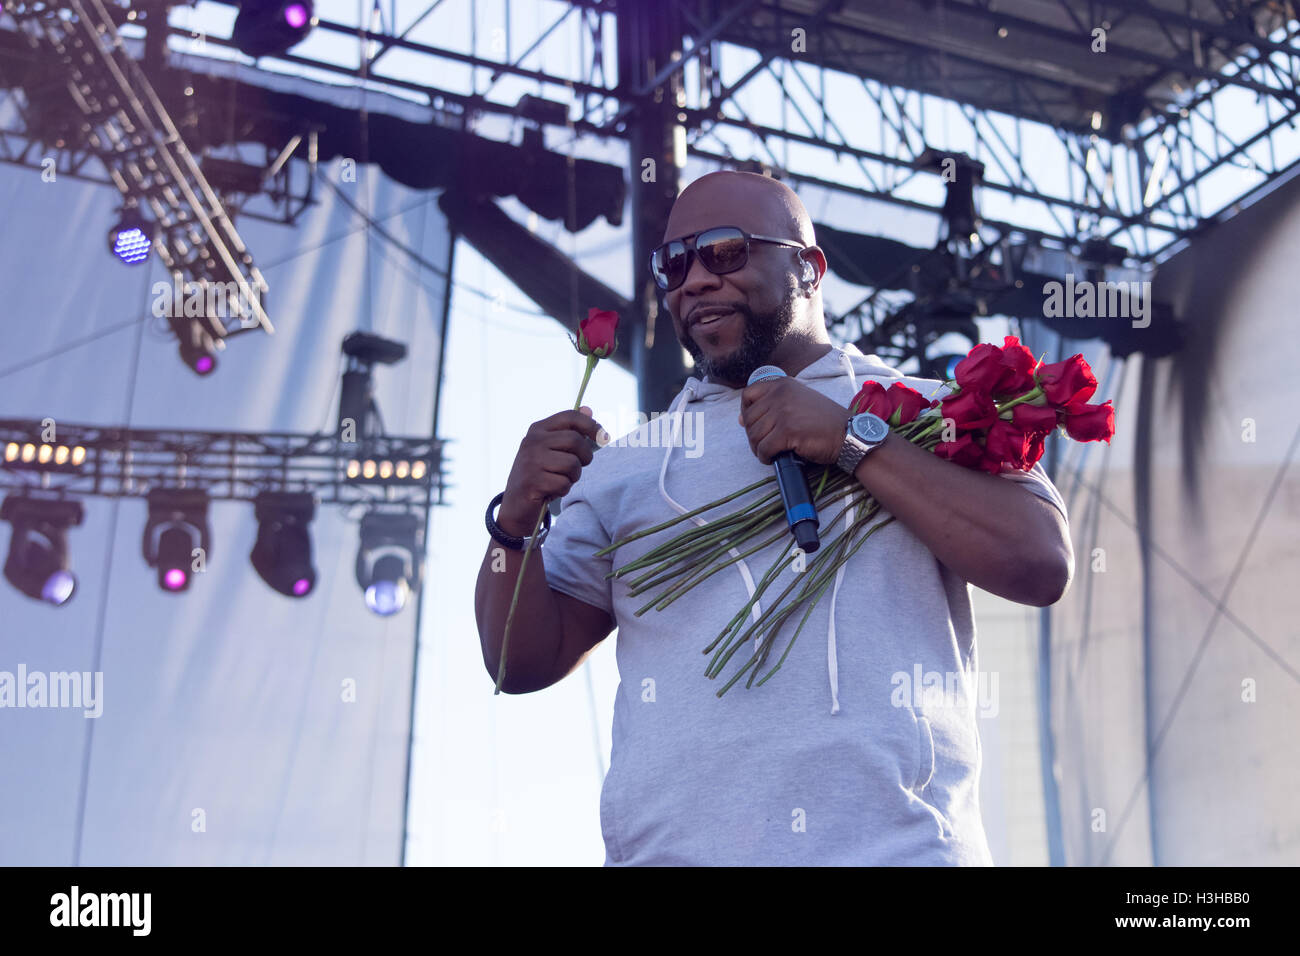 Wanya Morris of Boyz II Men join Dan + Shay on stage during day 2 of the Route 91 Harvest Festival on October 2, 2016 at the Las Vegas Village in Las Vegas, Nevada. Stock Photo